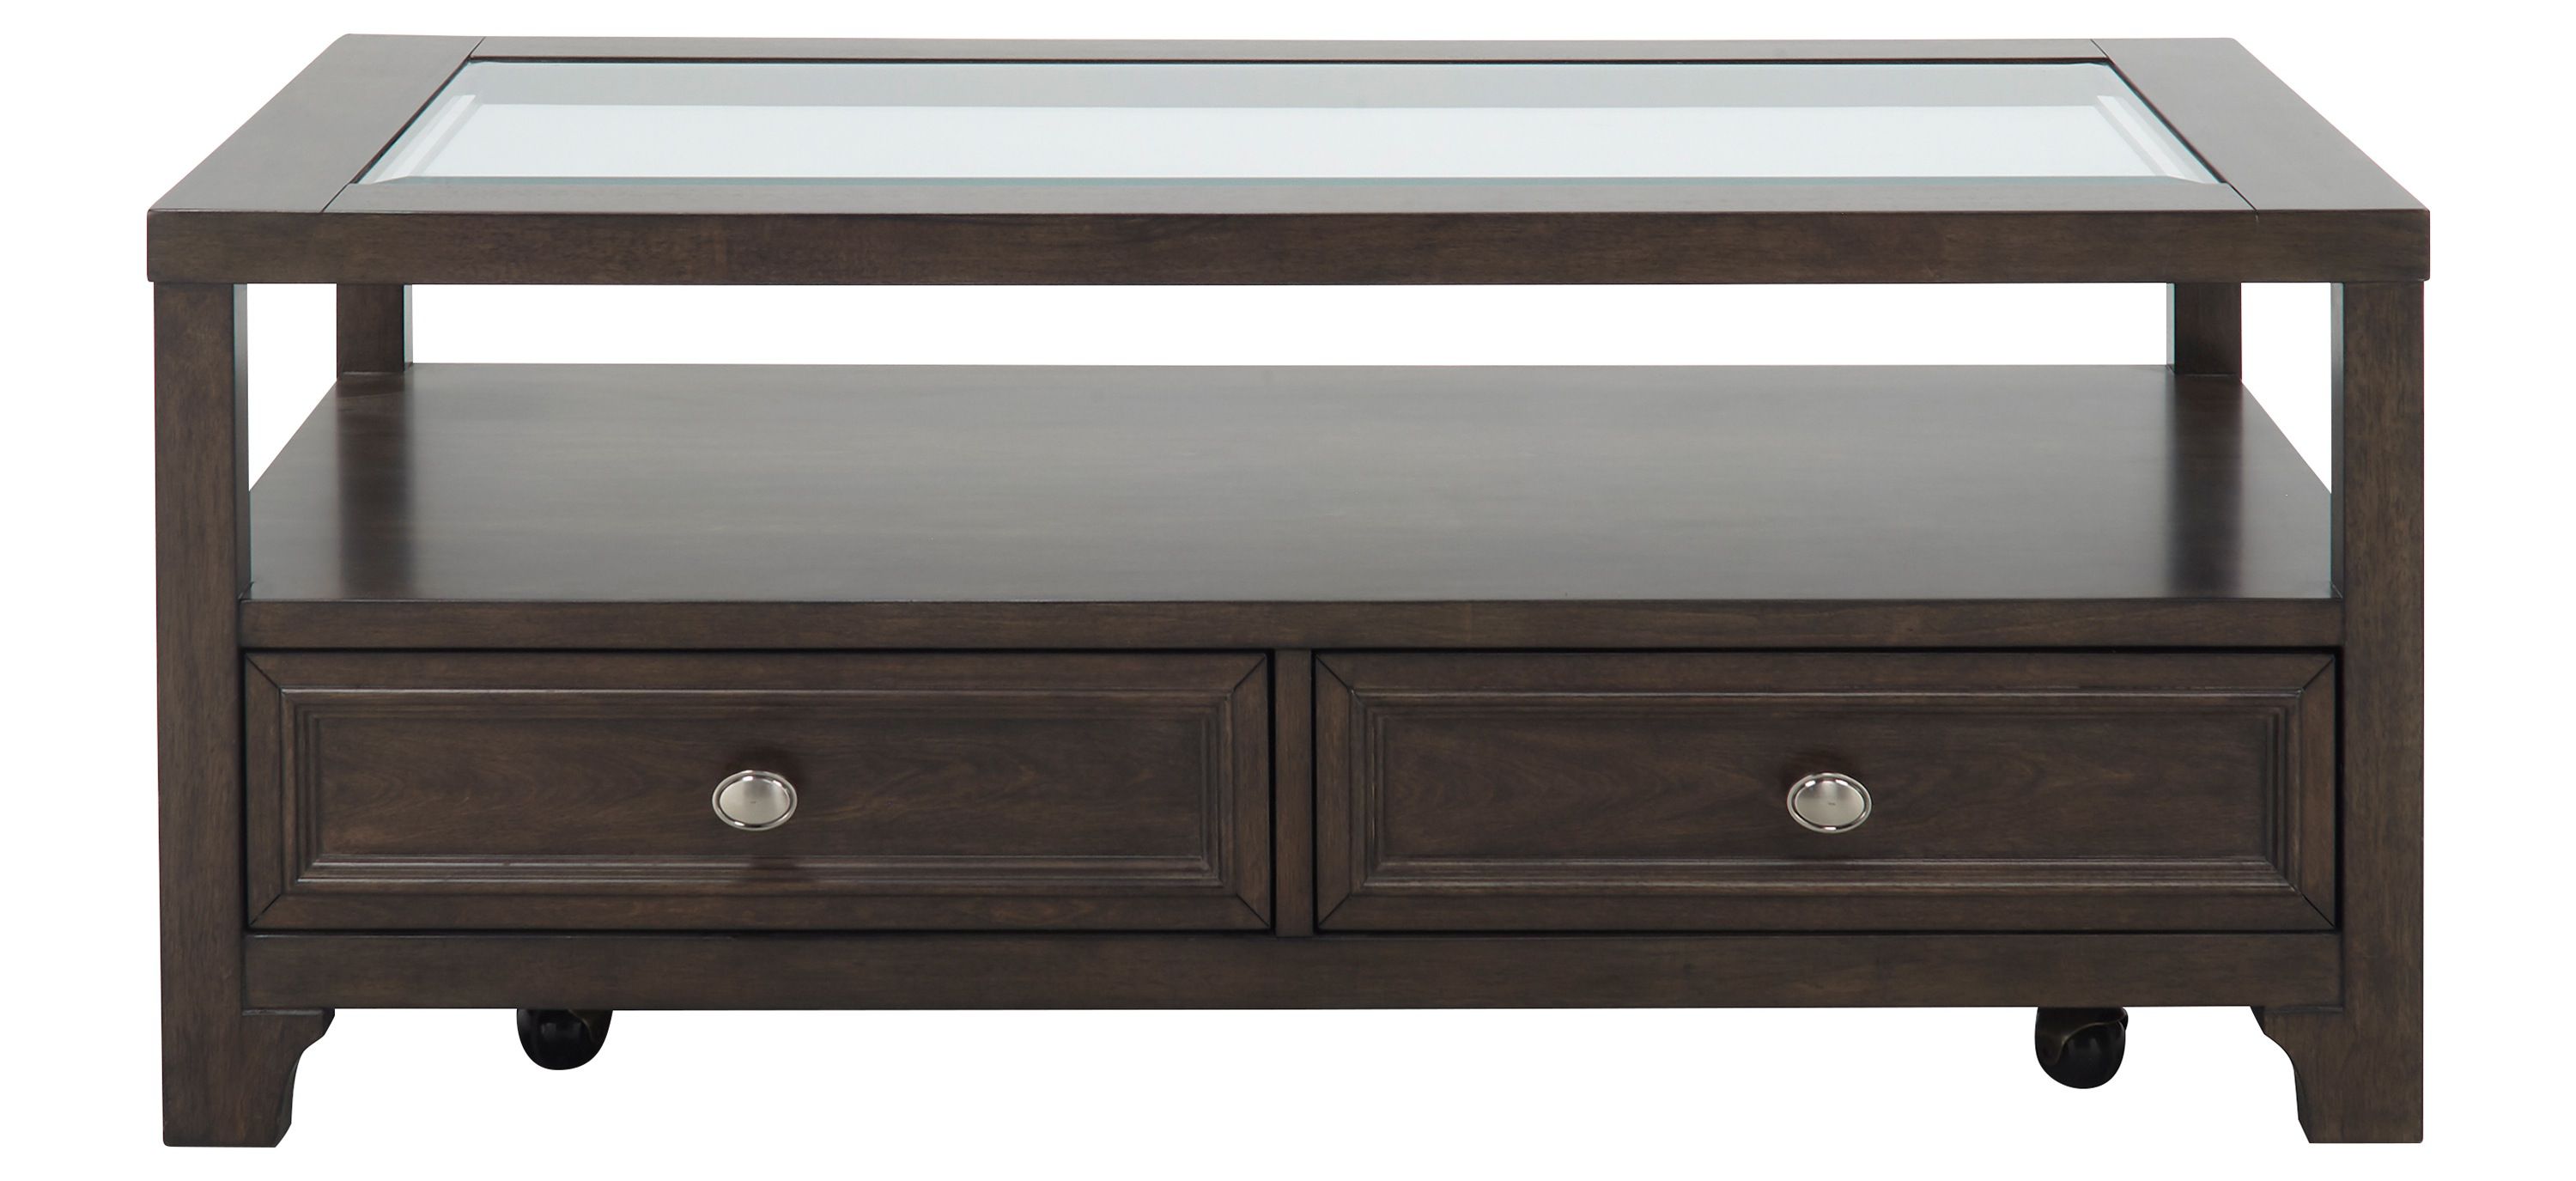 Whitwell Rectangular Cocktail Table